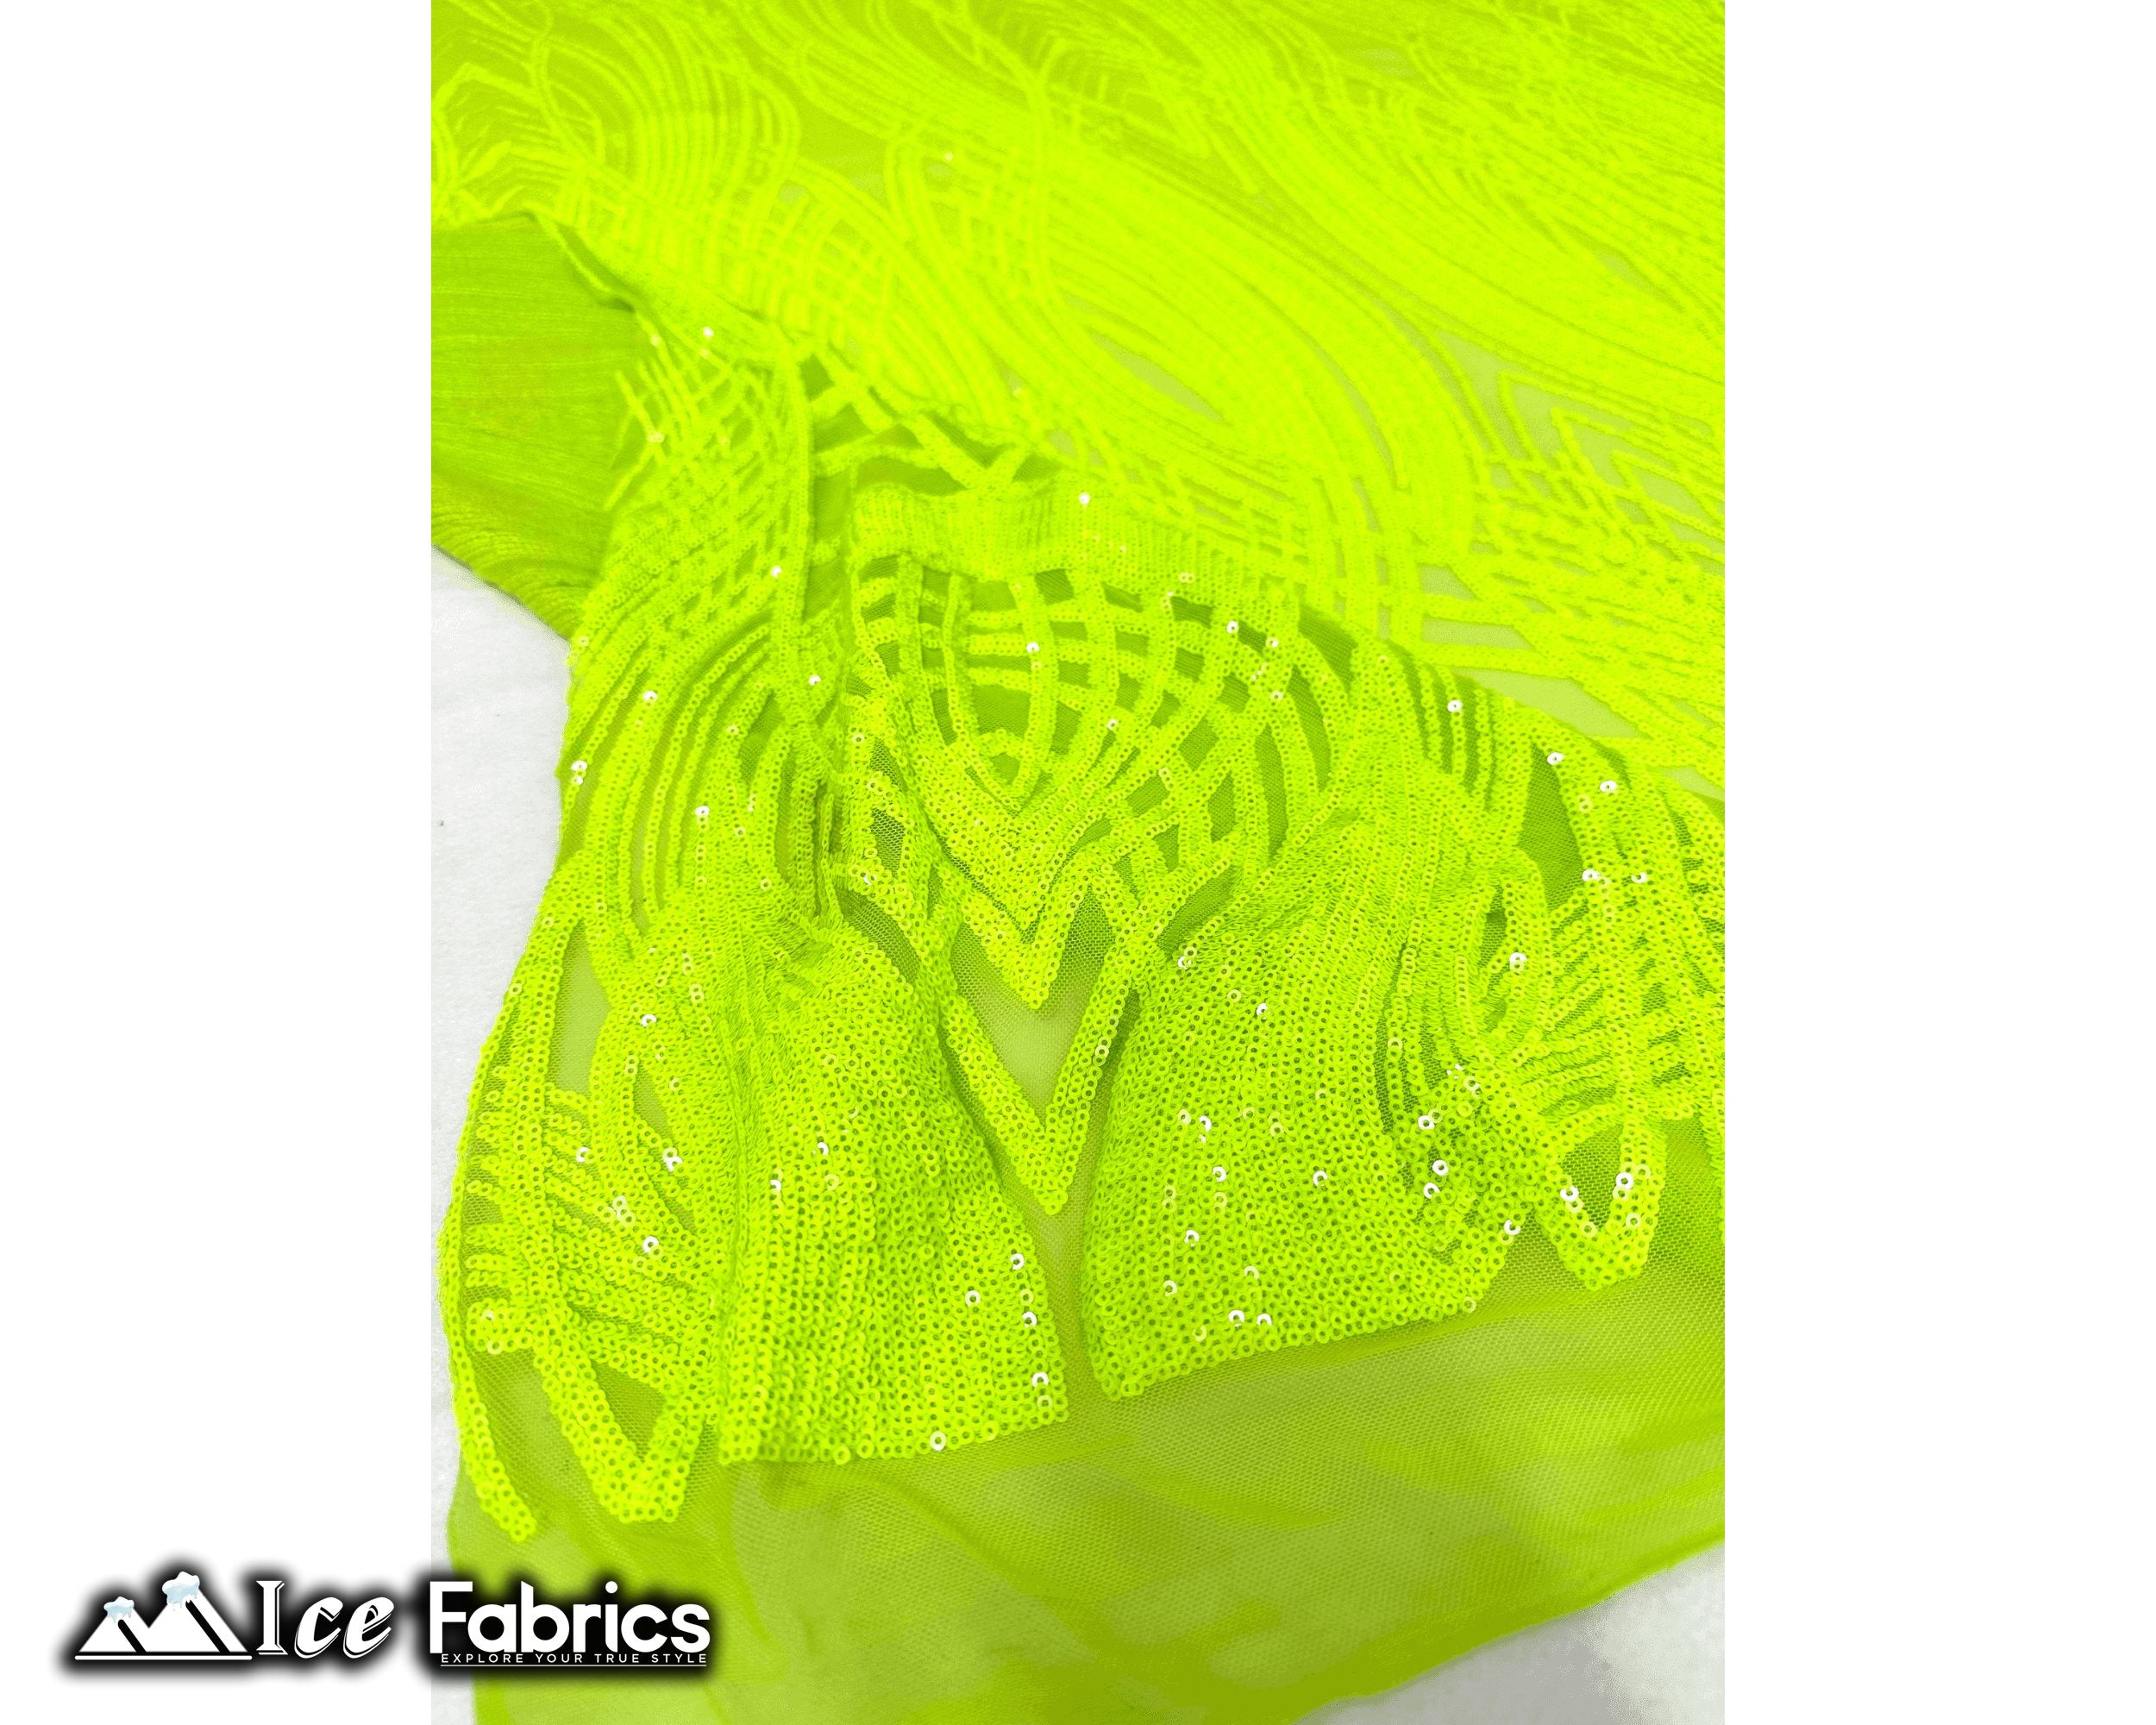 Peacock Sequin Fabric By The Yard 4 Way Stretch Spandex ICE FABRICS Neon Green